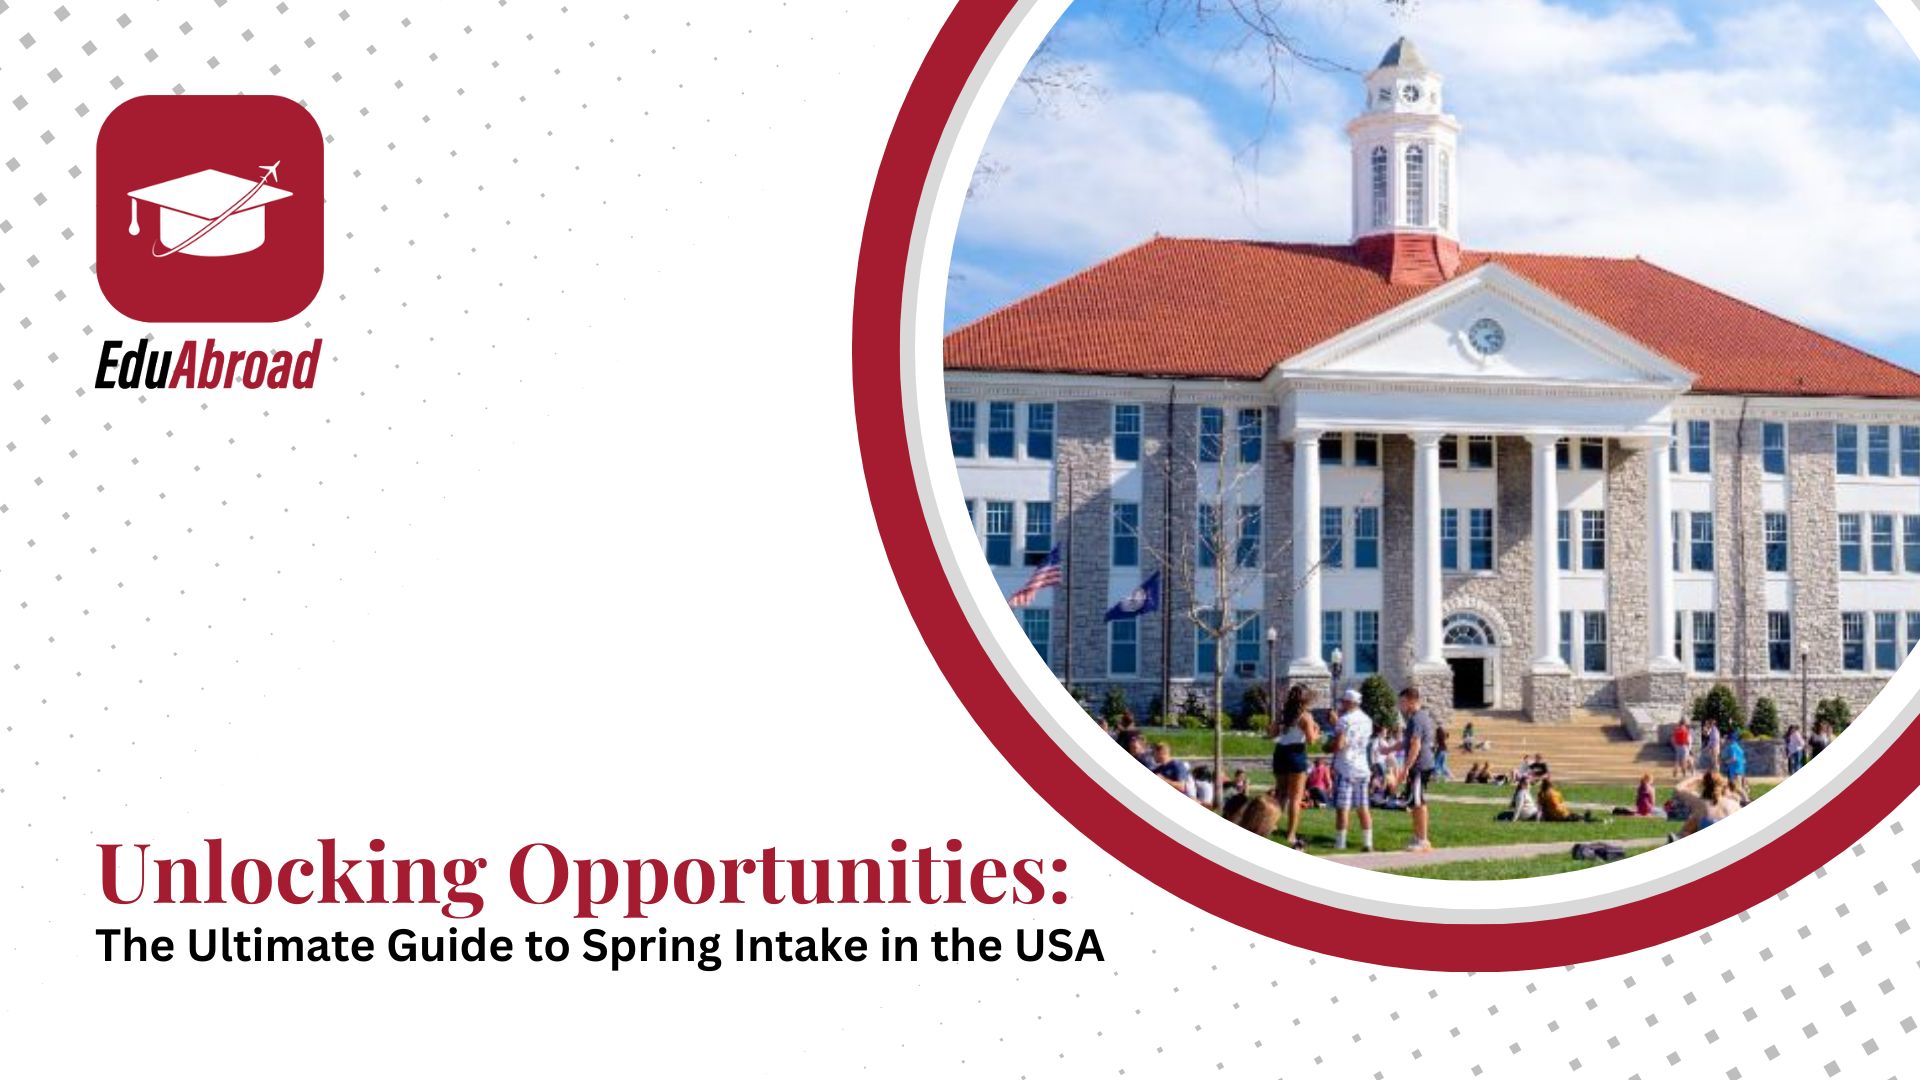 Unlocking Opportunities: The Ultimate Guide to Spring Intake in the USA